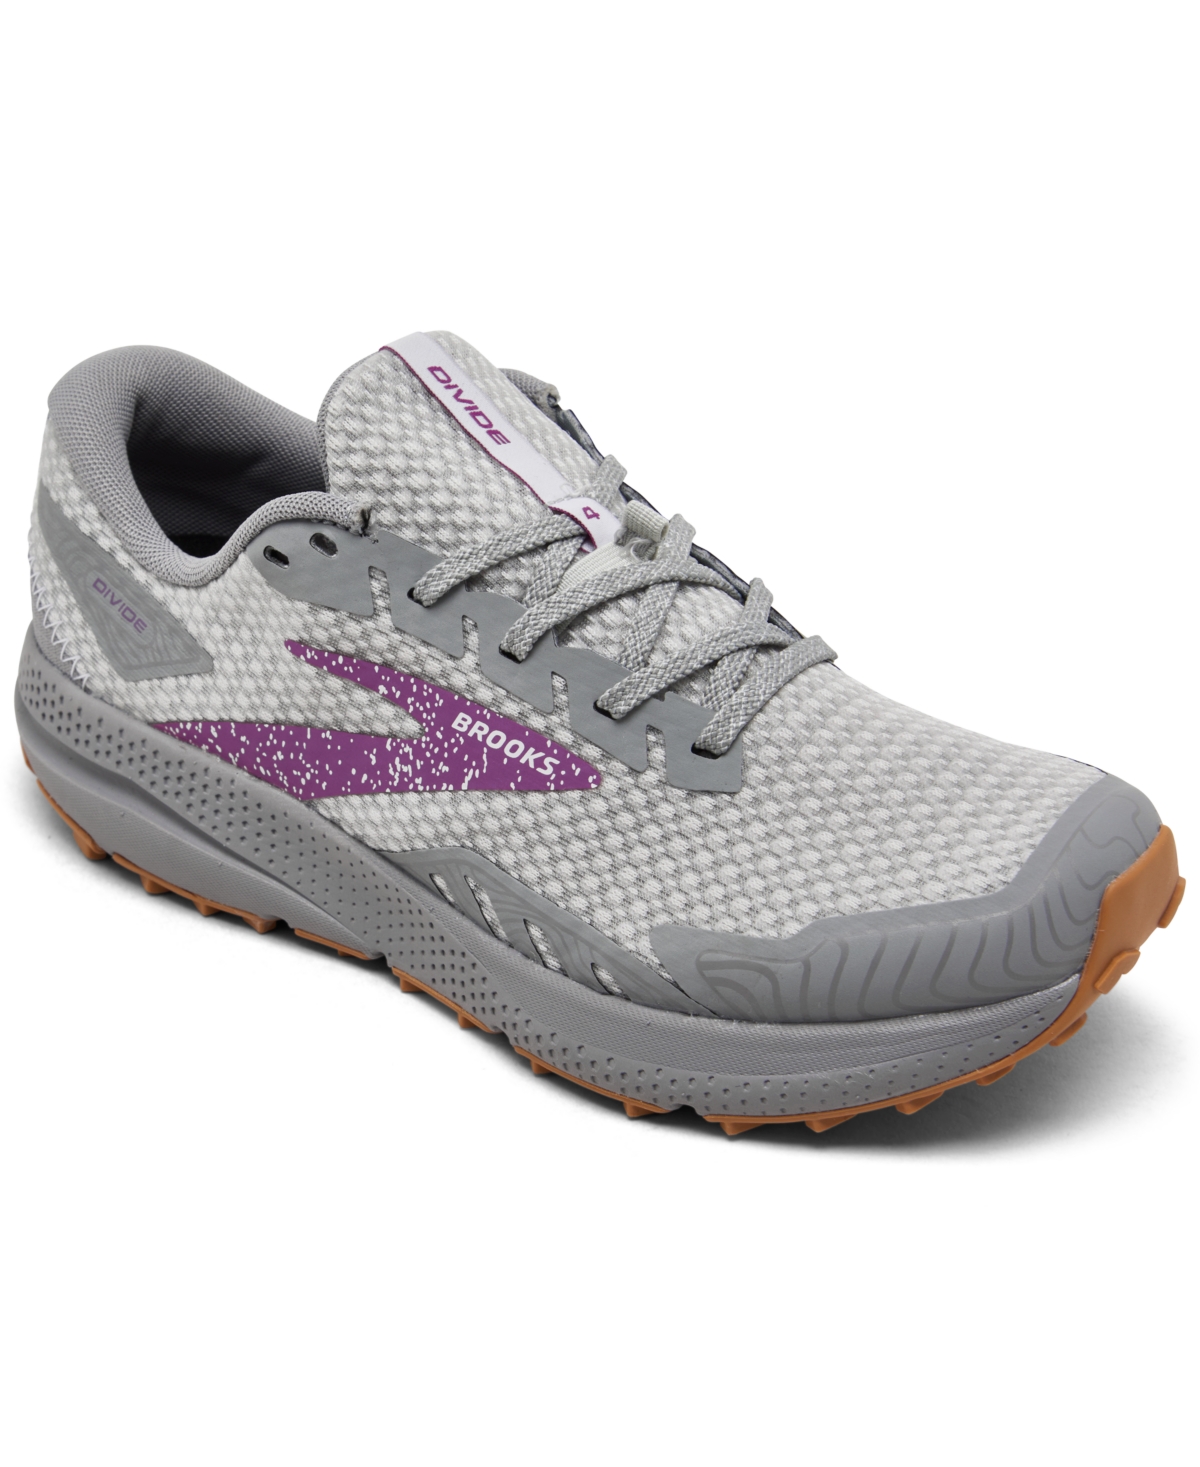 Women's Divide 4 Trail Running Sneakers from Finish Line - Alloy, Oyster, Violet